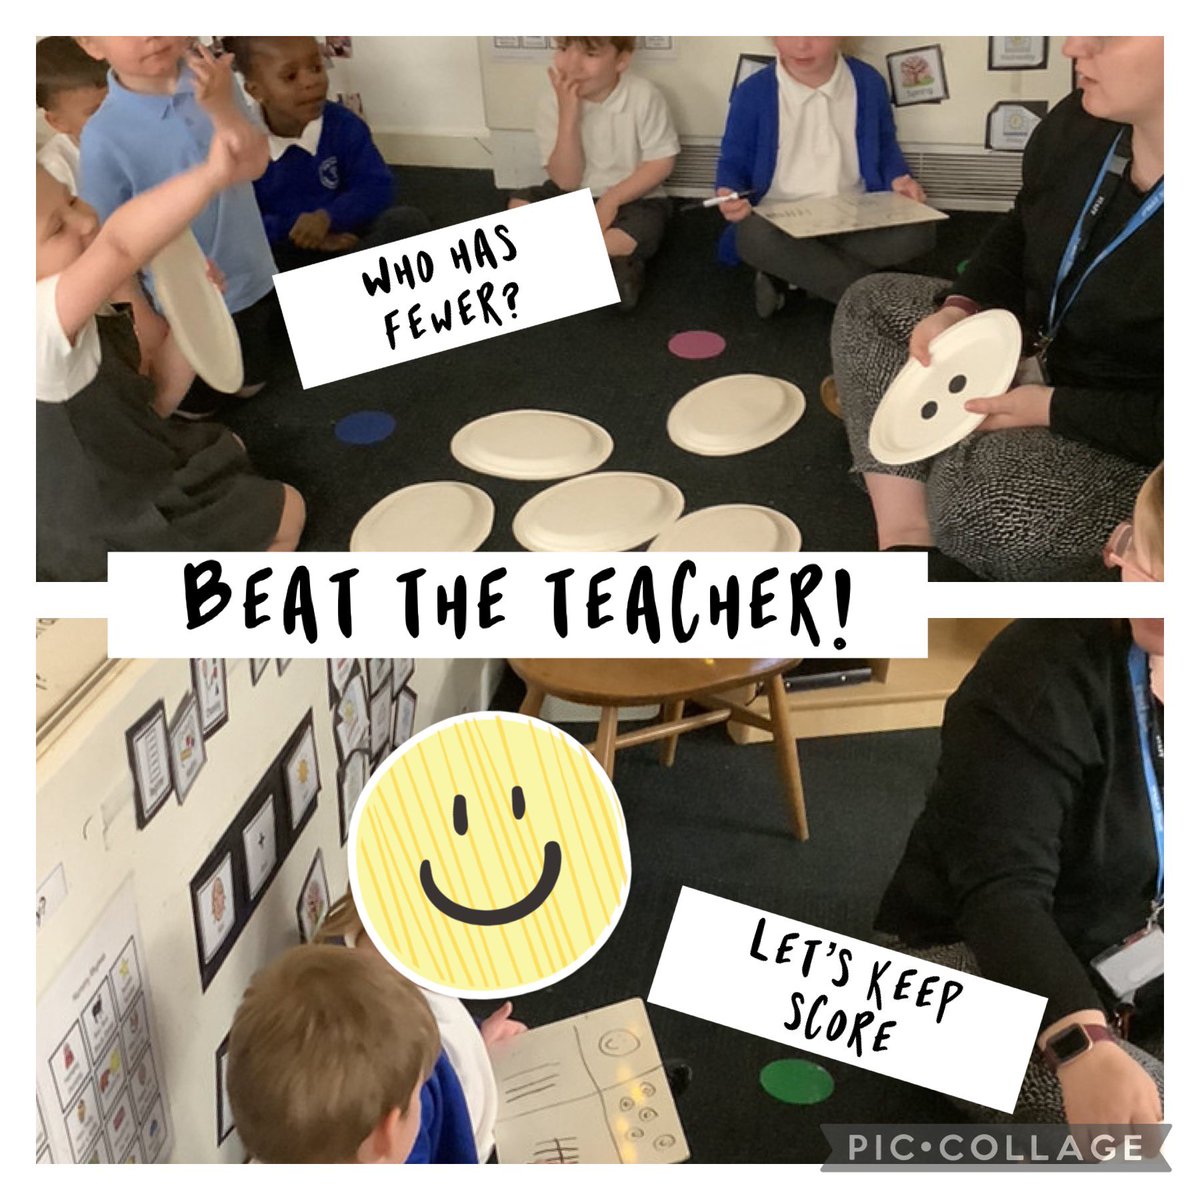 Who We have loved playing beat the teacher in owls today. We are comparing amounts and finding who has fewer! #agpamaths